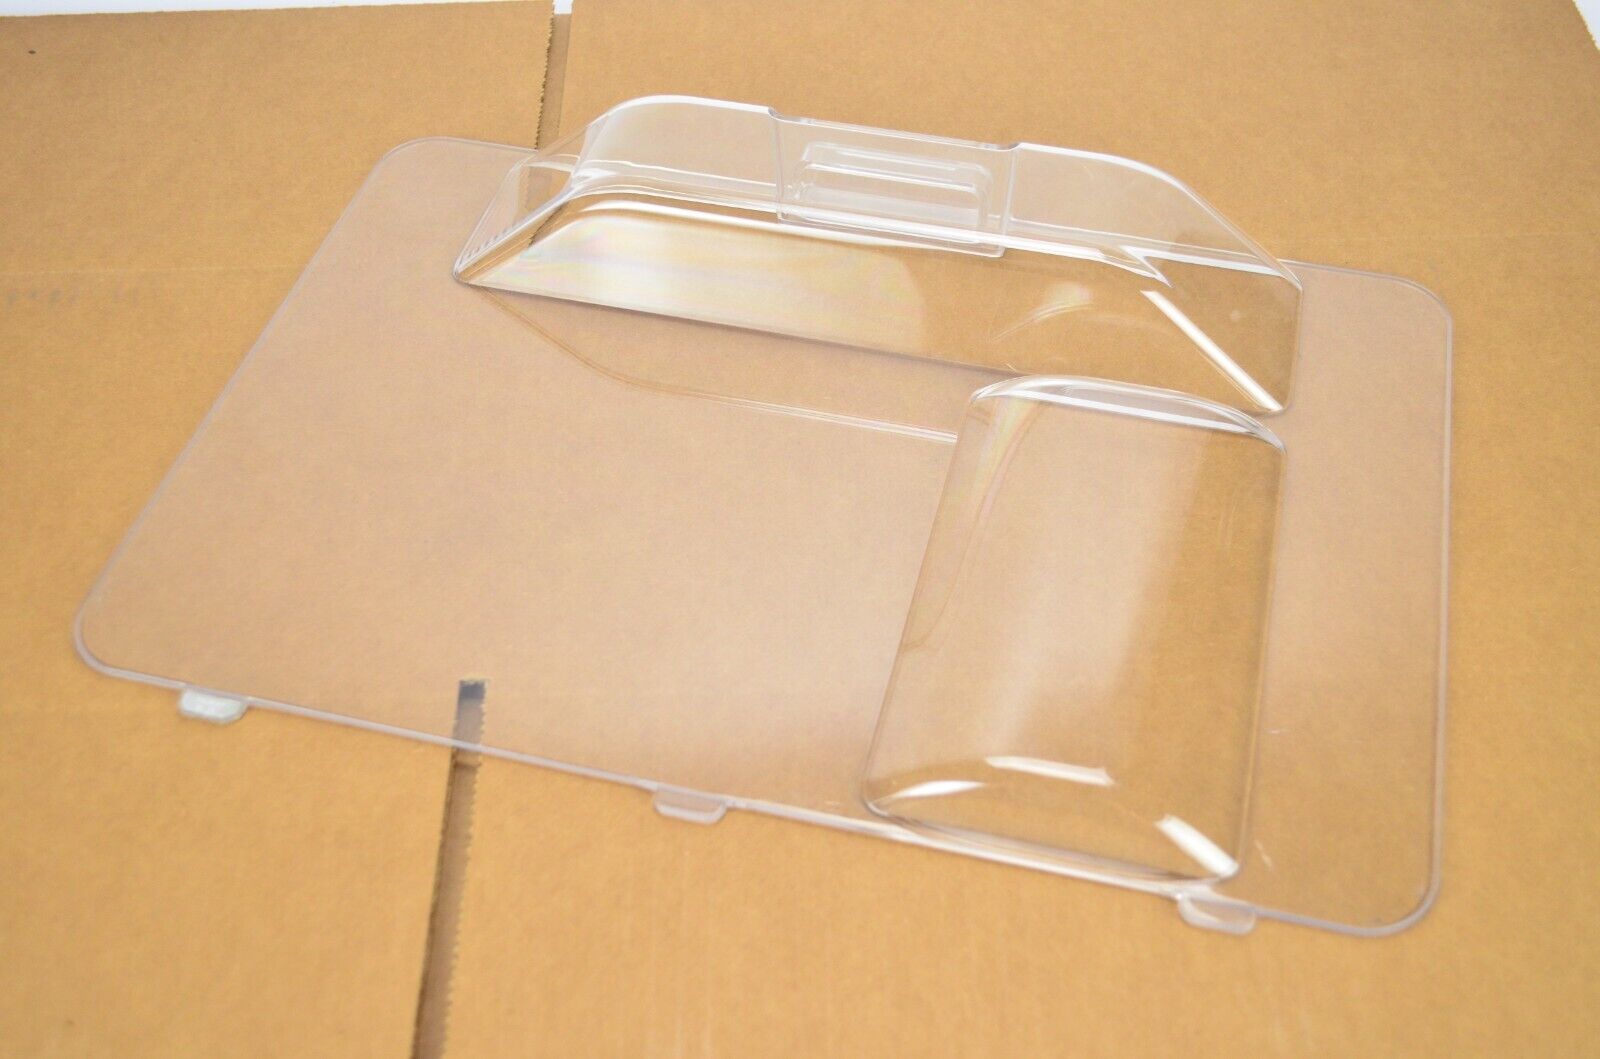 Apple PowerMac G5 Airflow Shield Plastic Cover A1047 Clear Insert